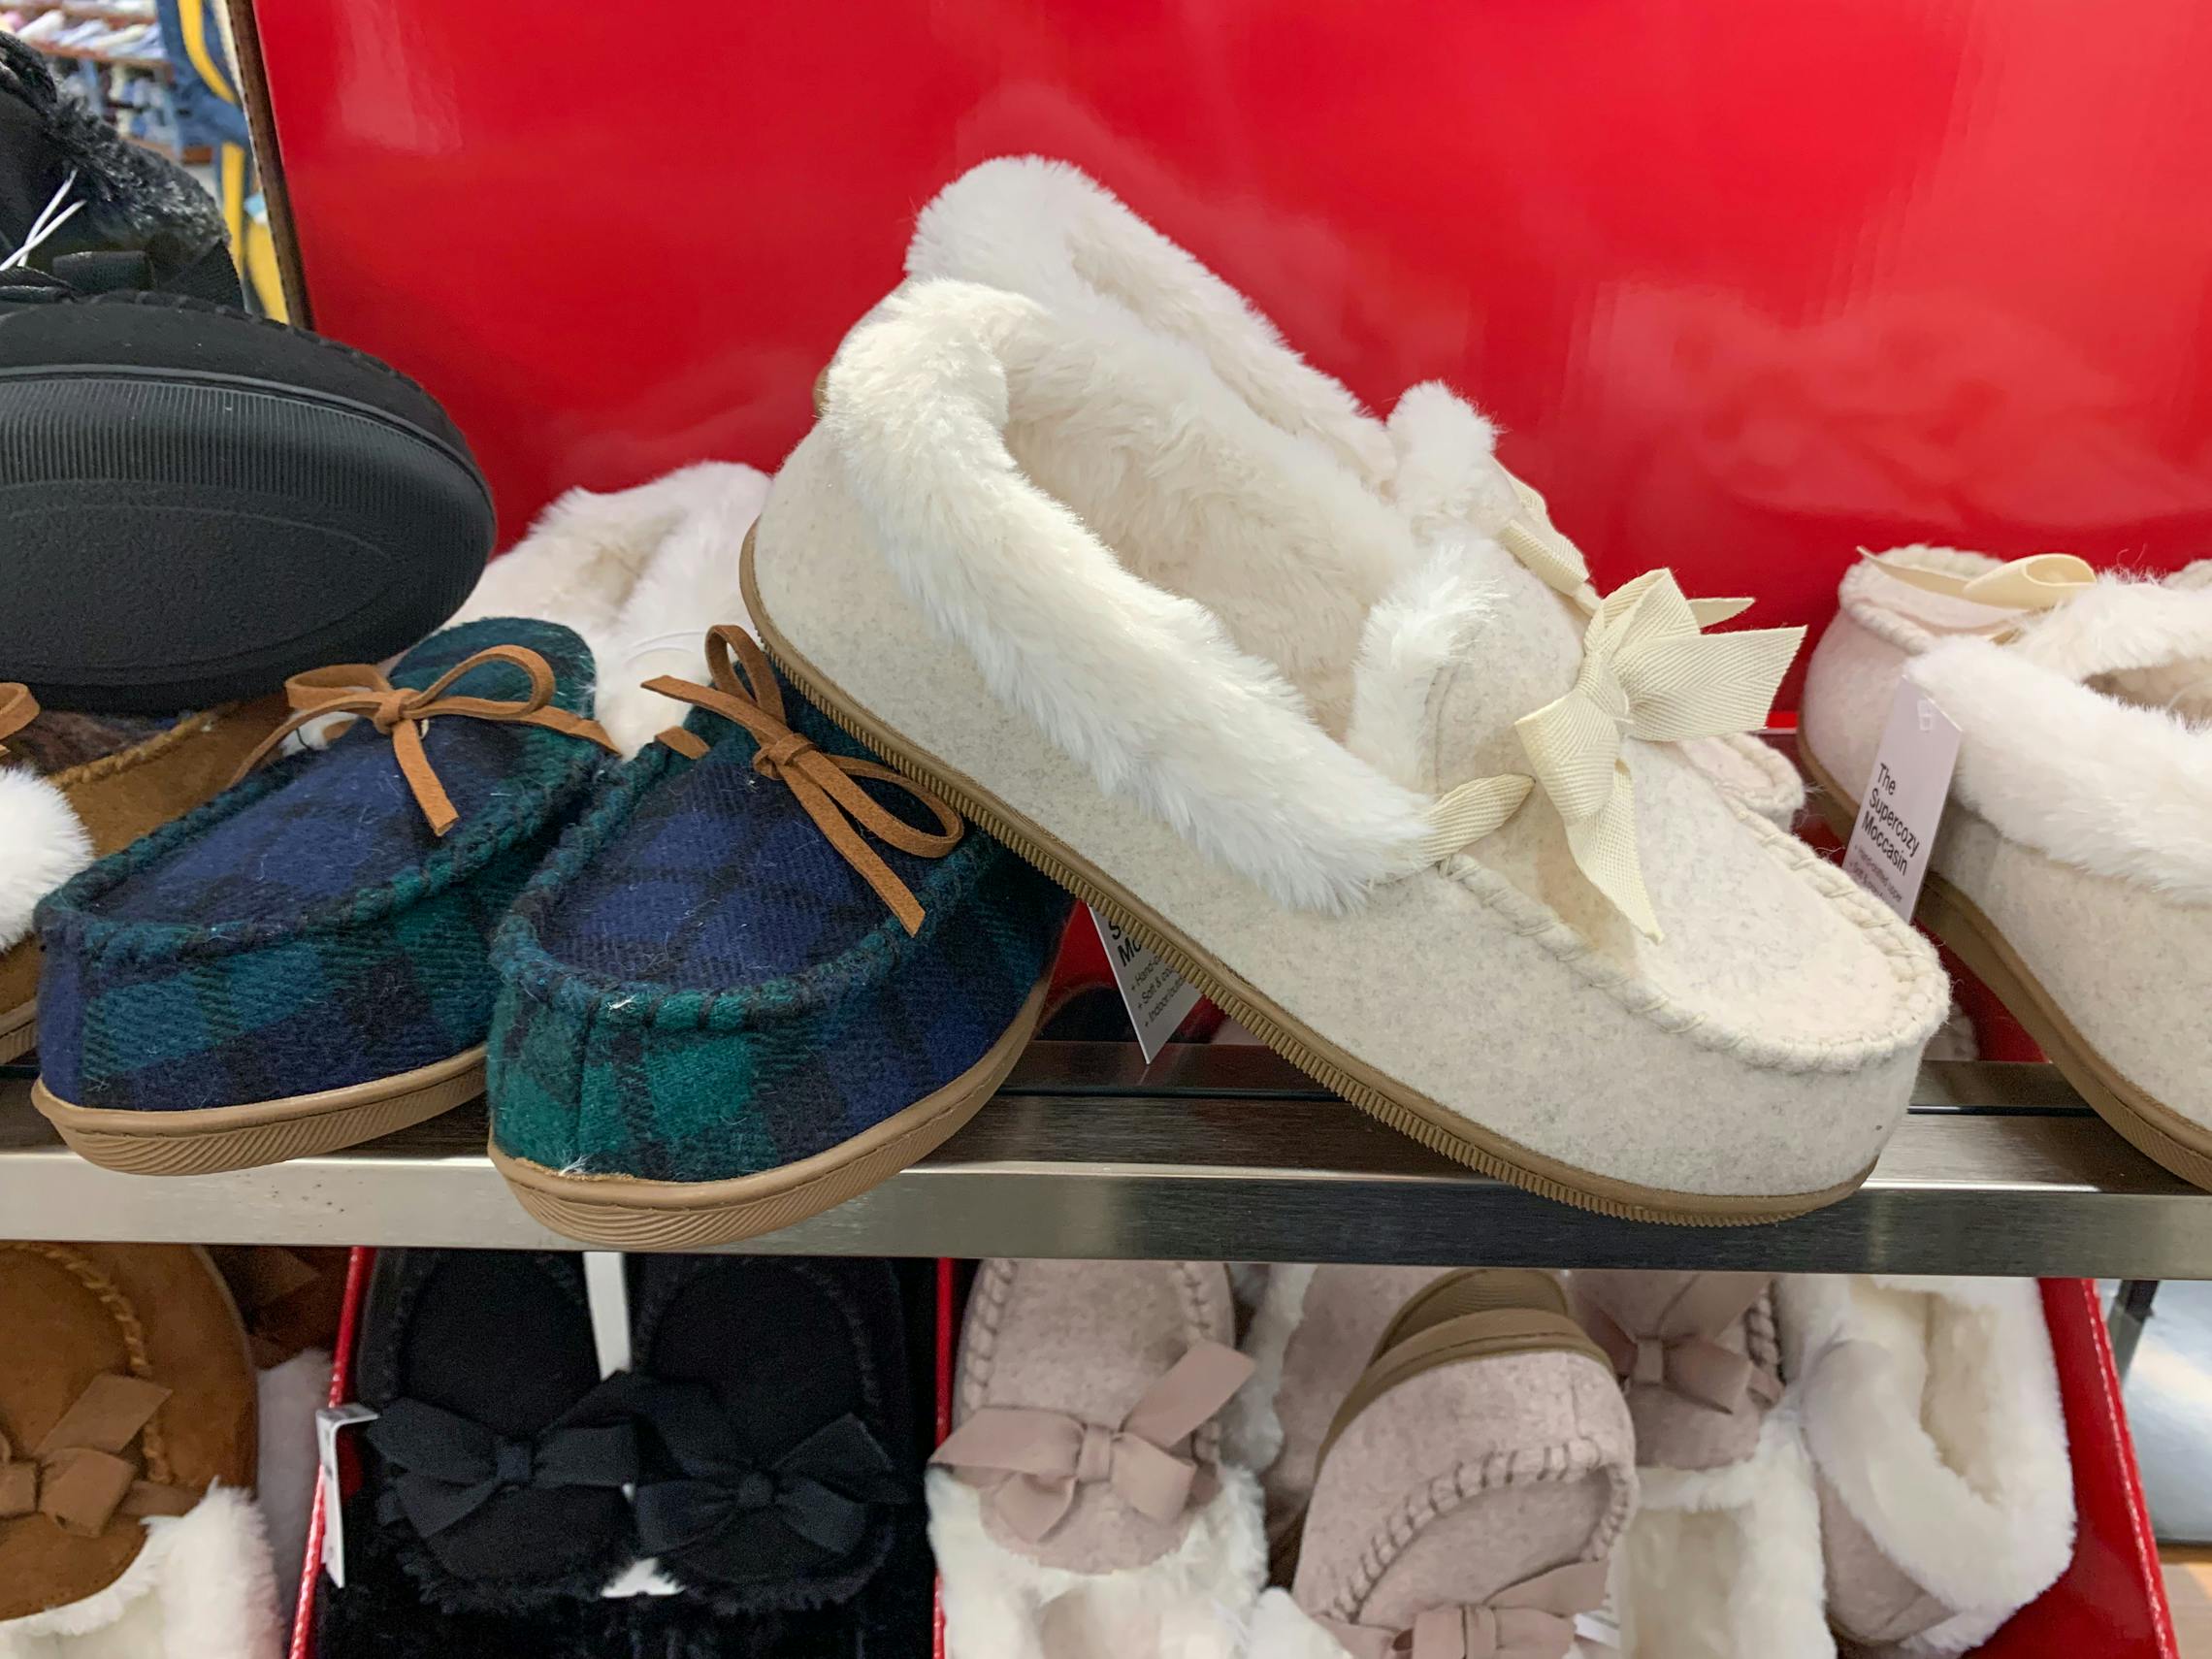 Women's Sonoma Moccasin Slippers, $9.59 